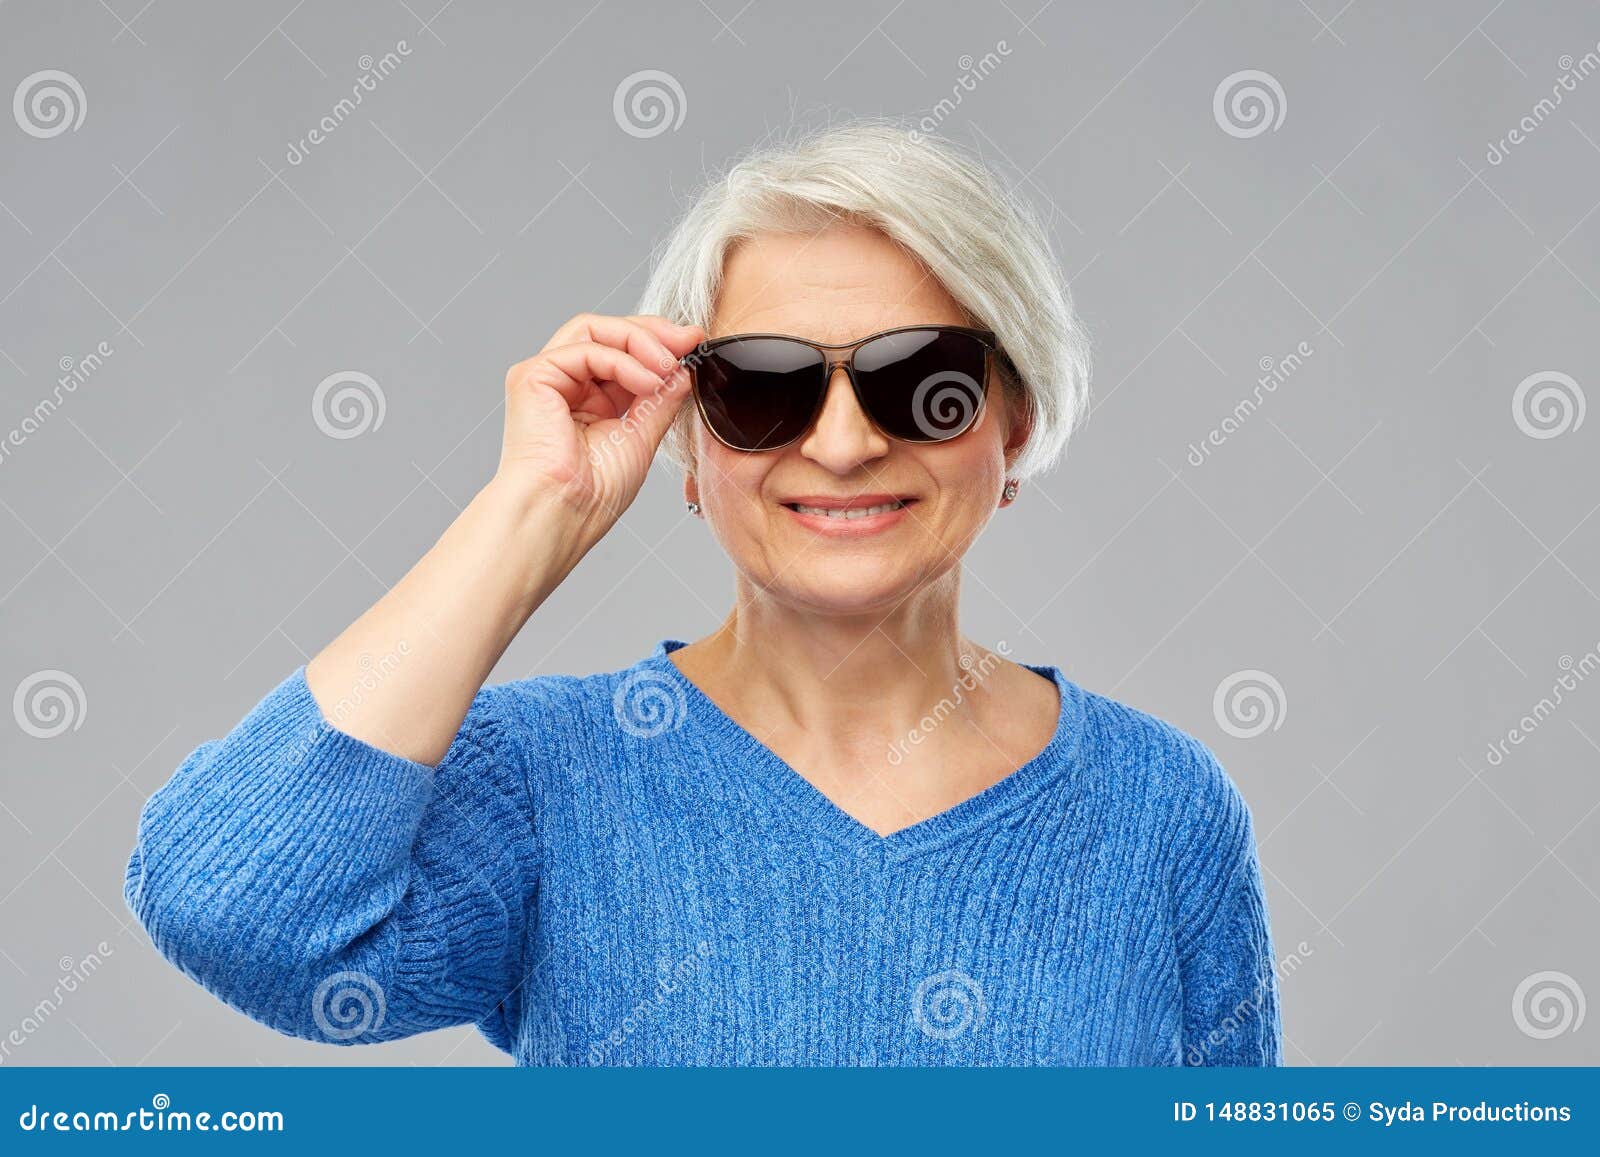 Top 167+ old people sunglasses